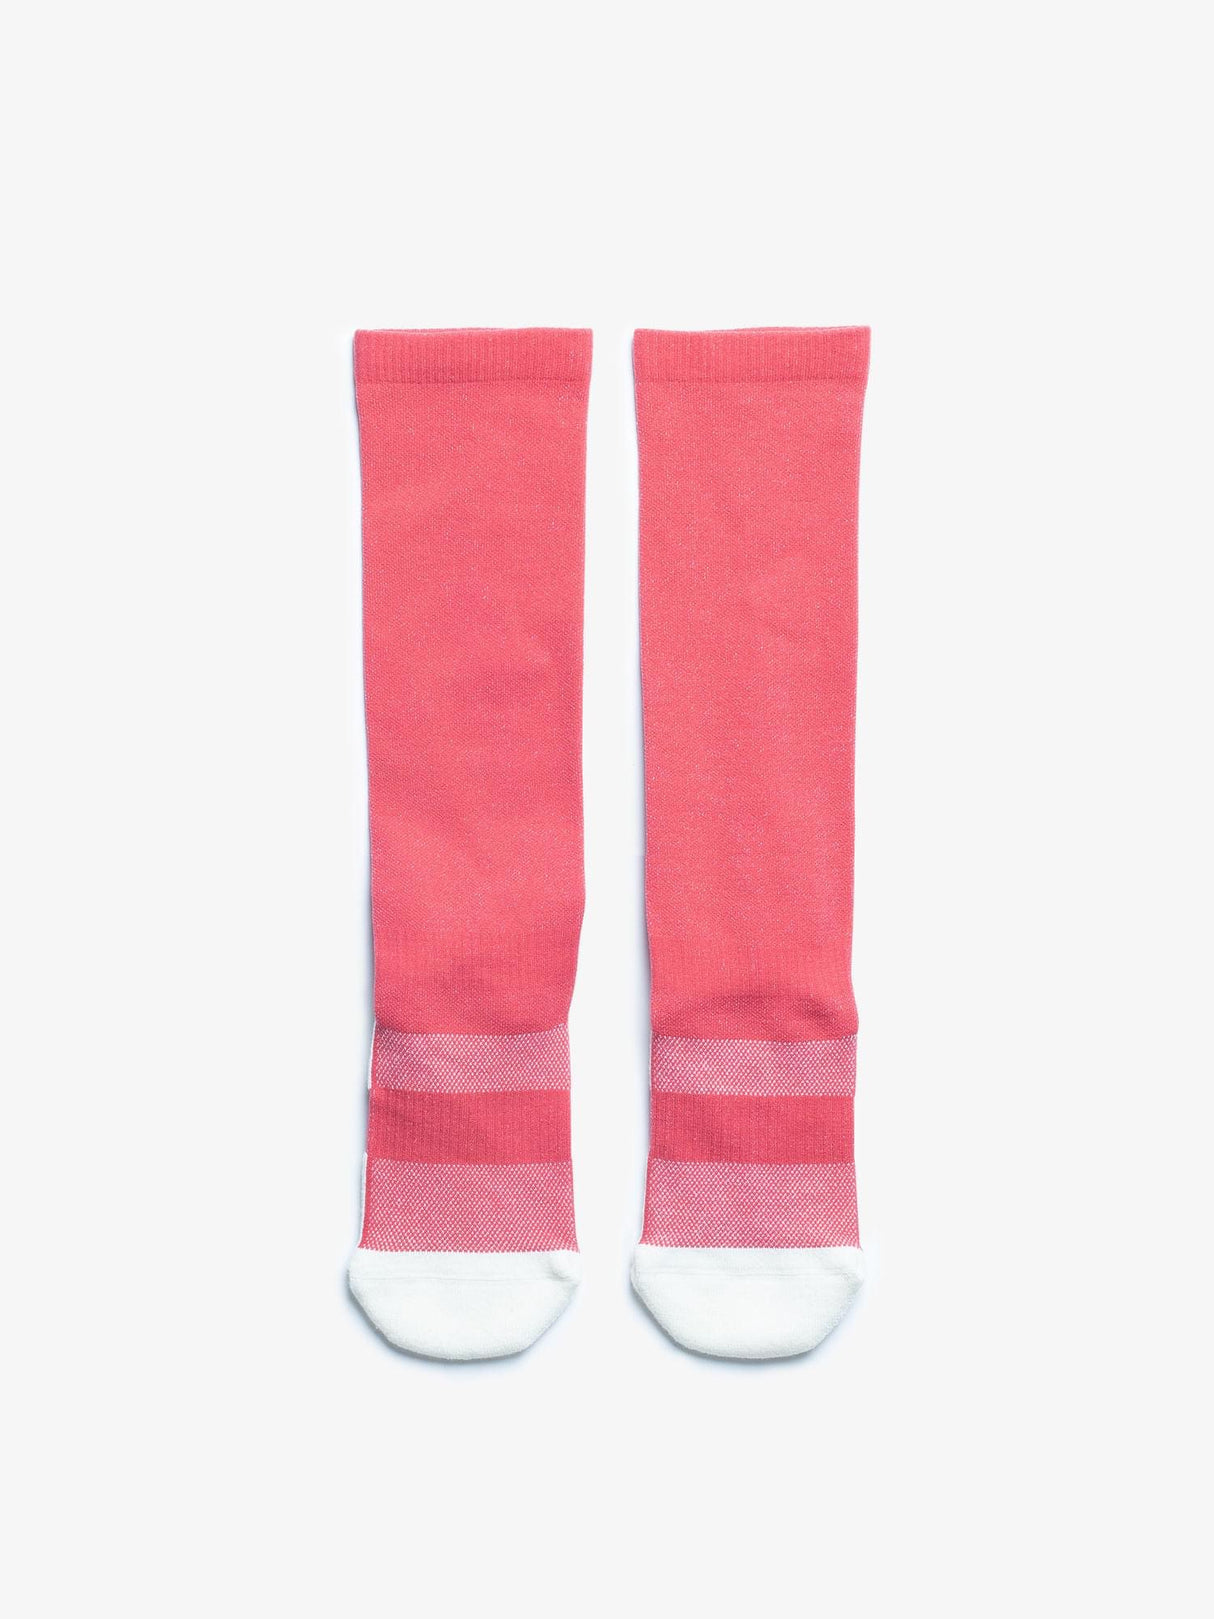 PS of Sweden Lisa Riding Socks Berry Pink | 2 pack